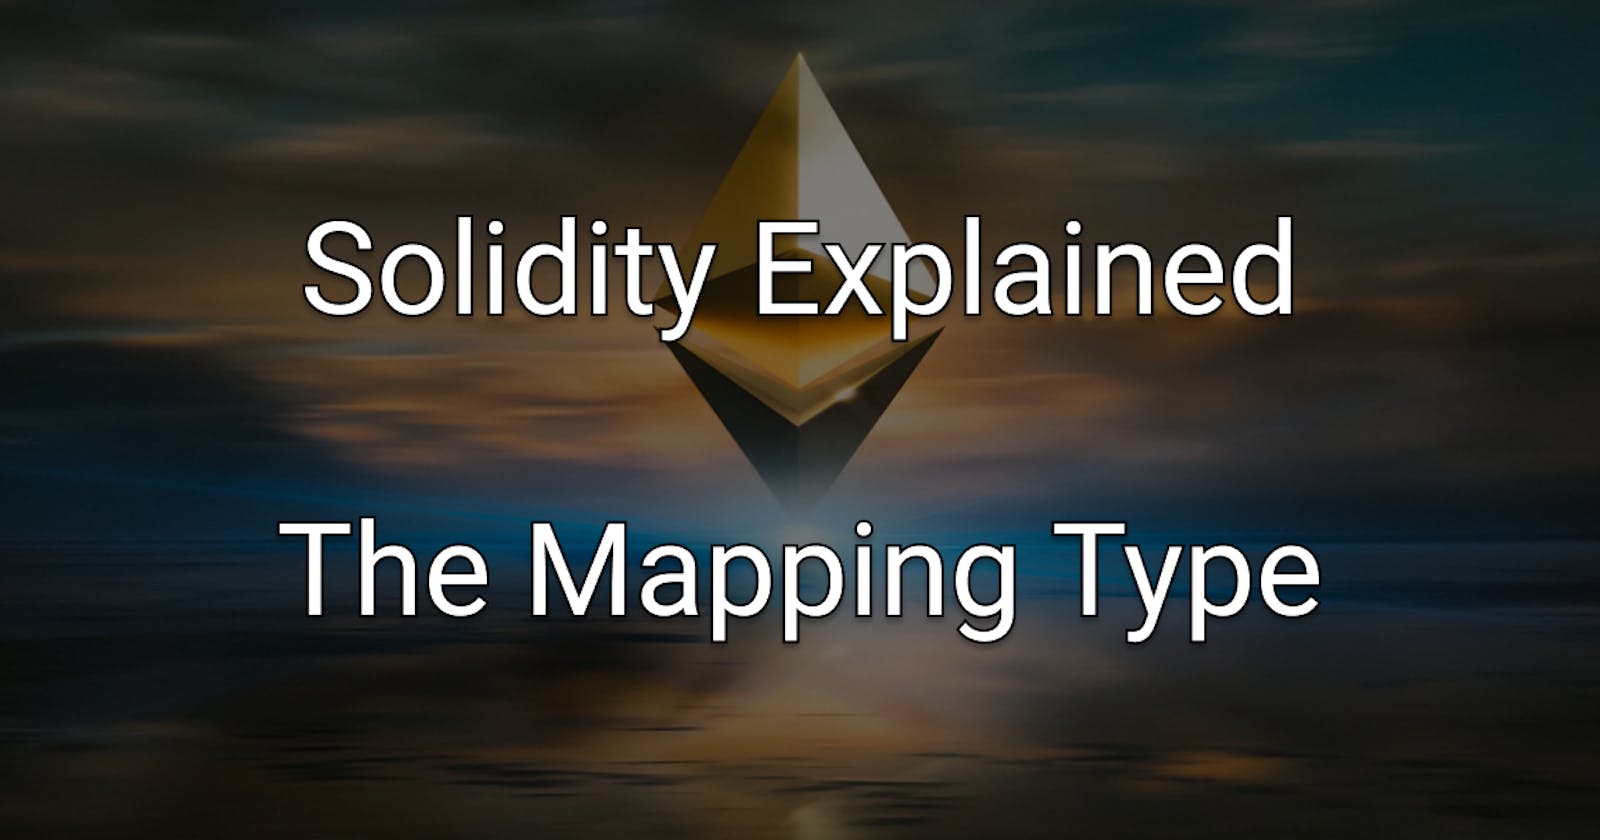 Solidity Explained: The Mapping Type